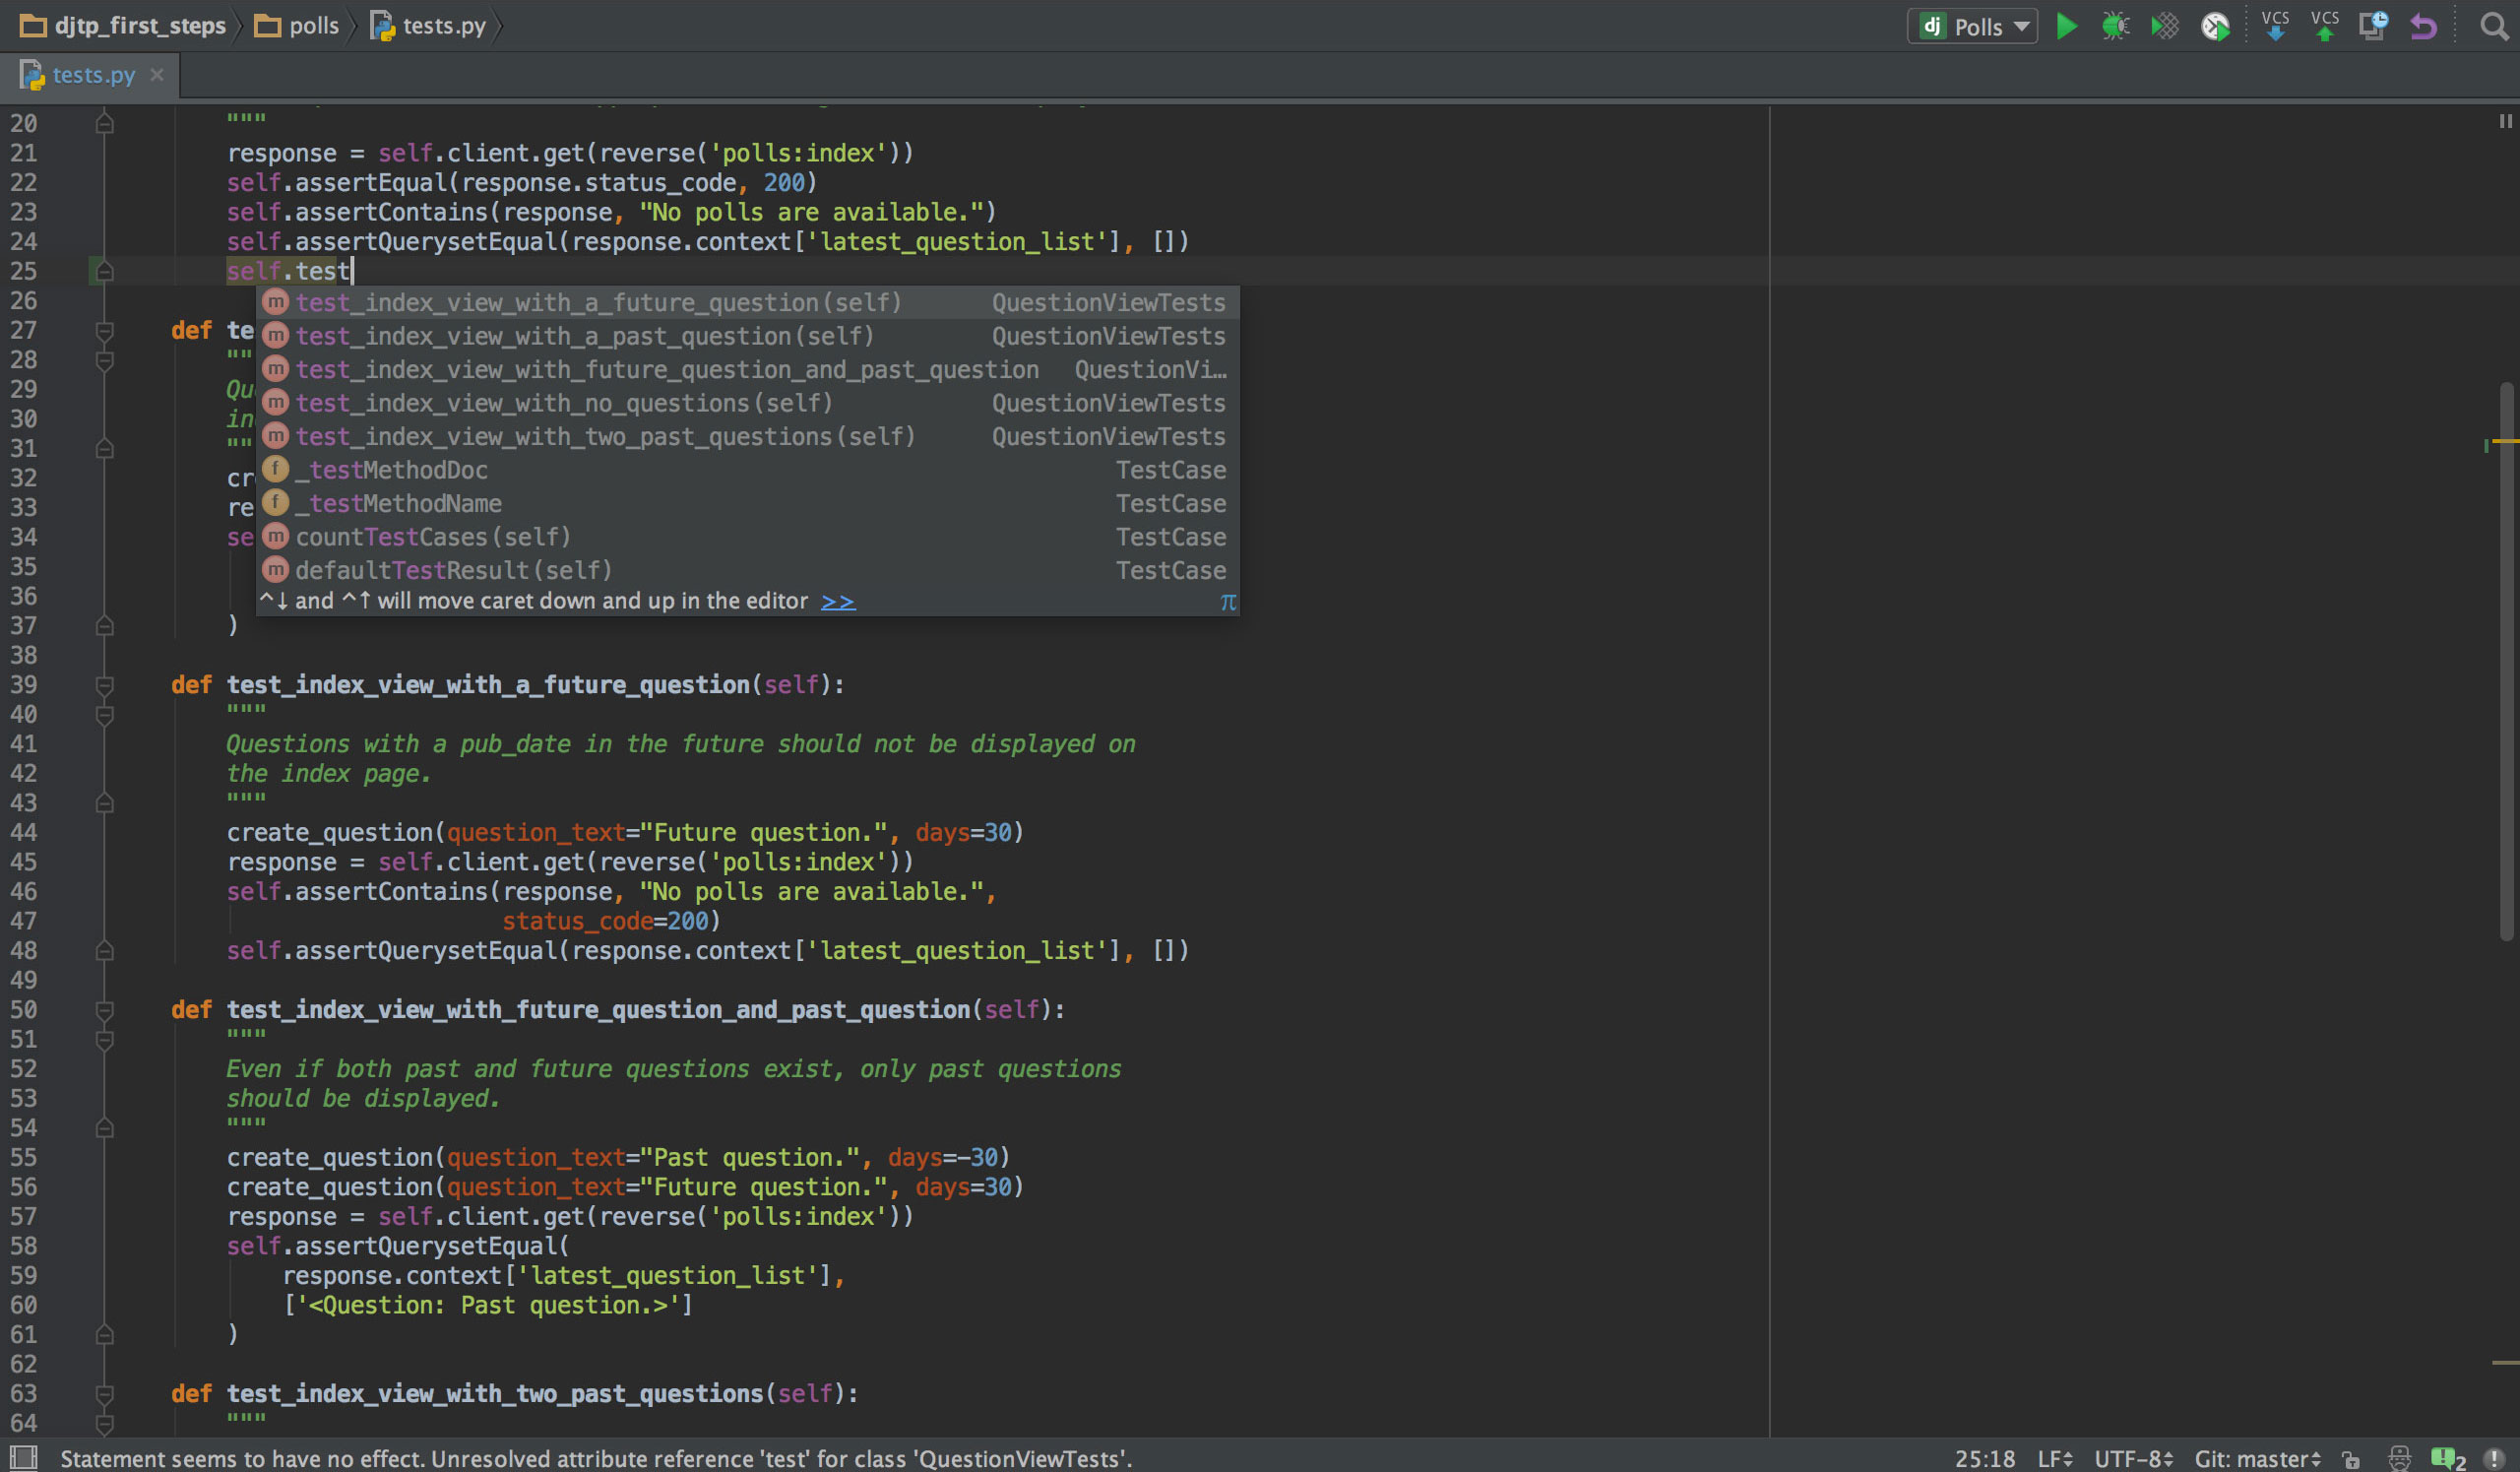 The PyCharm IDE interface